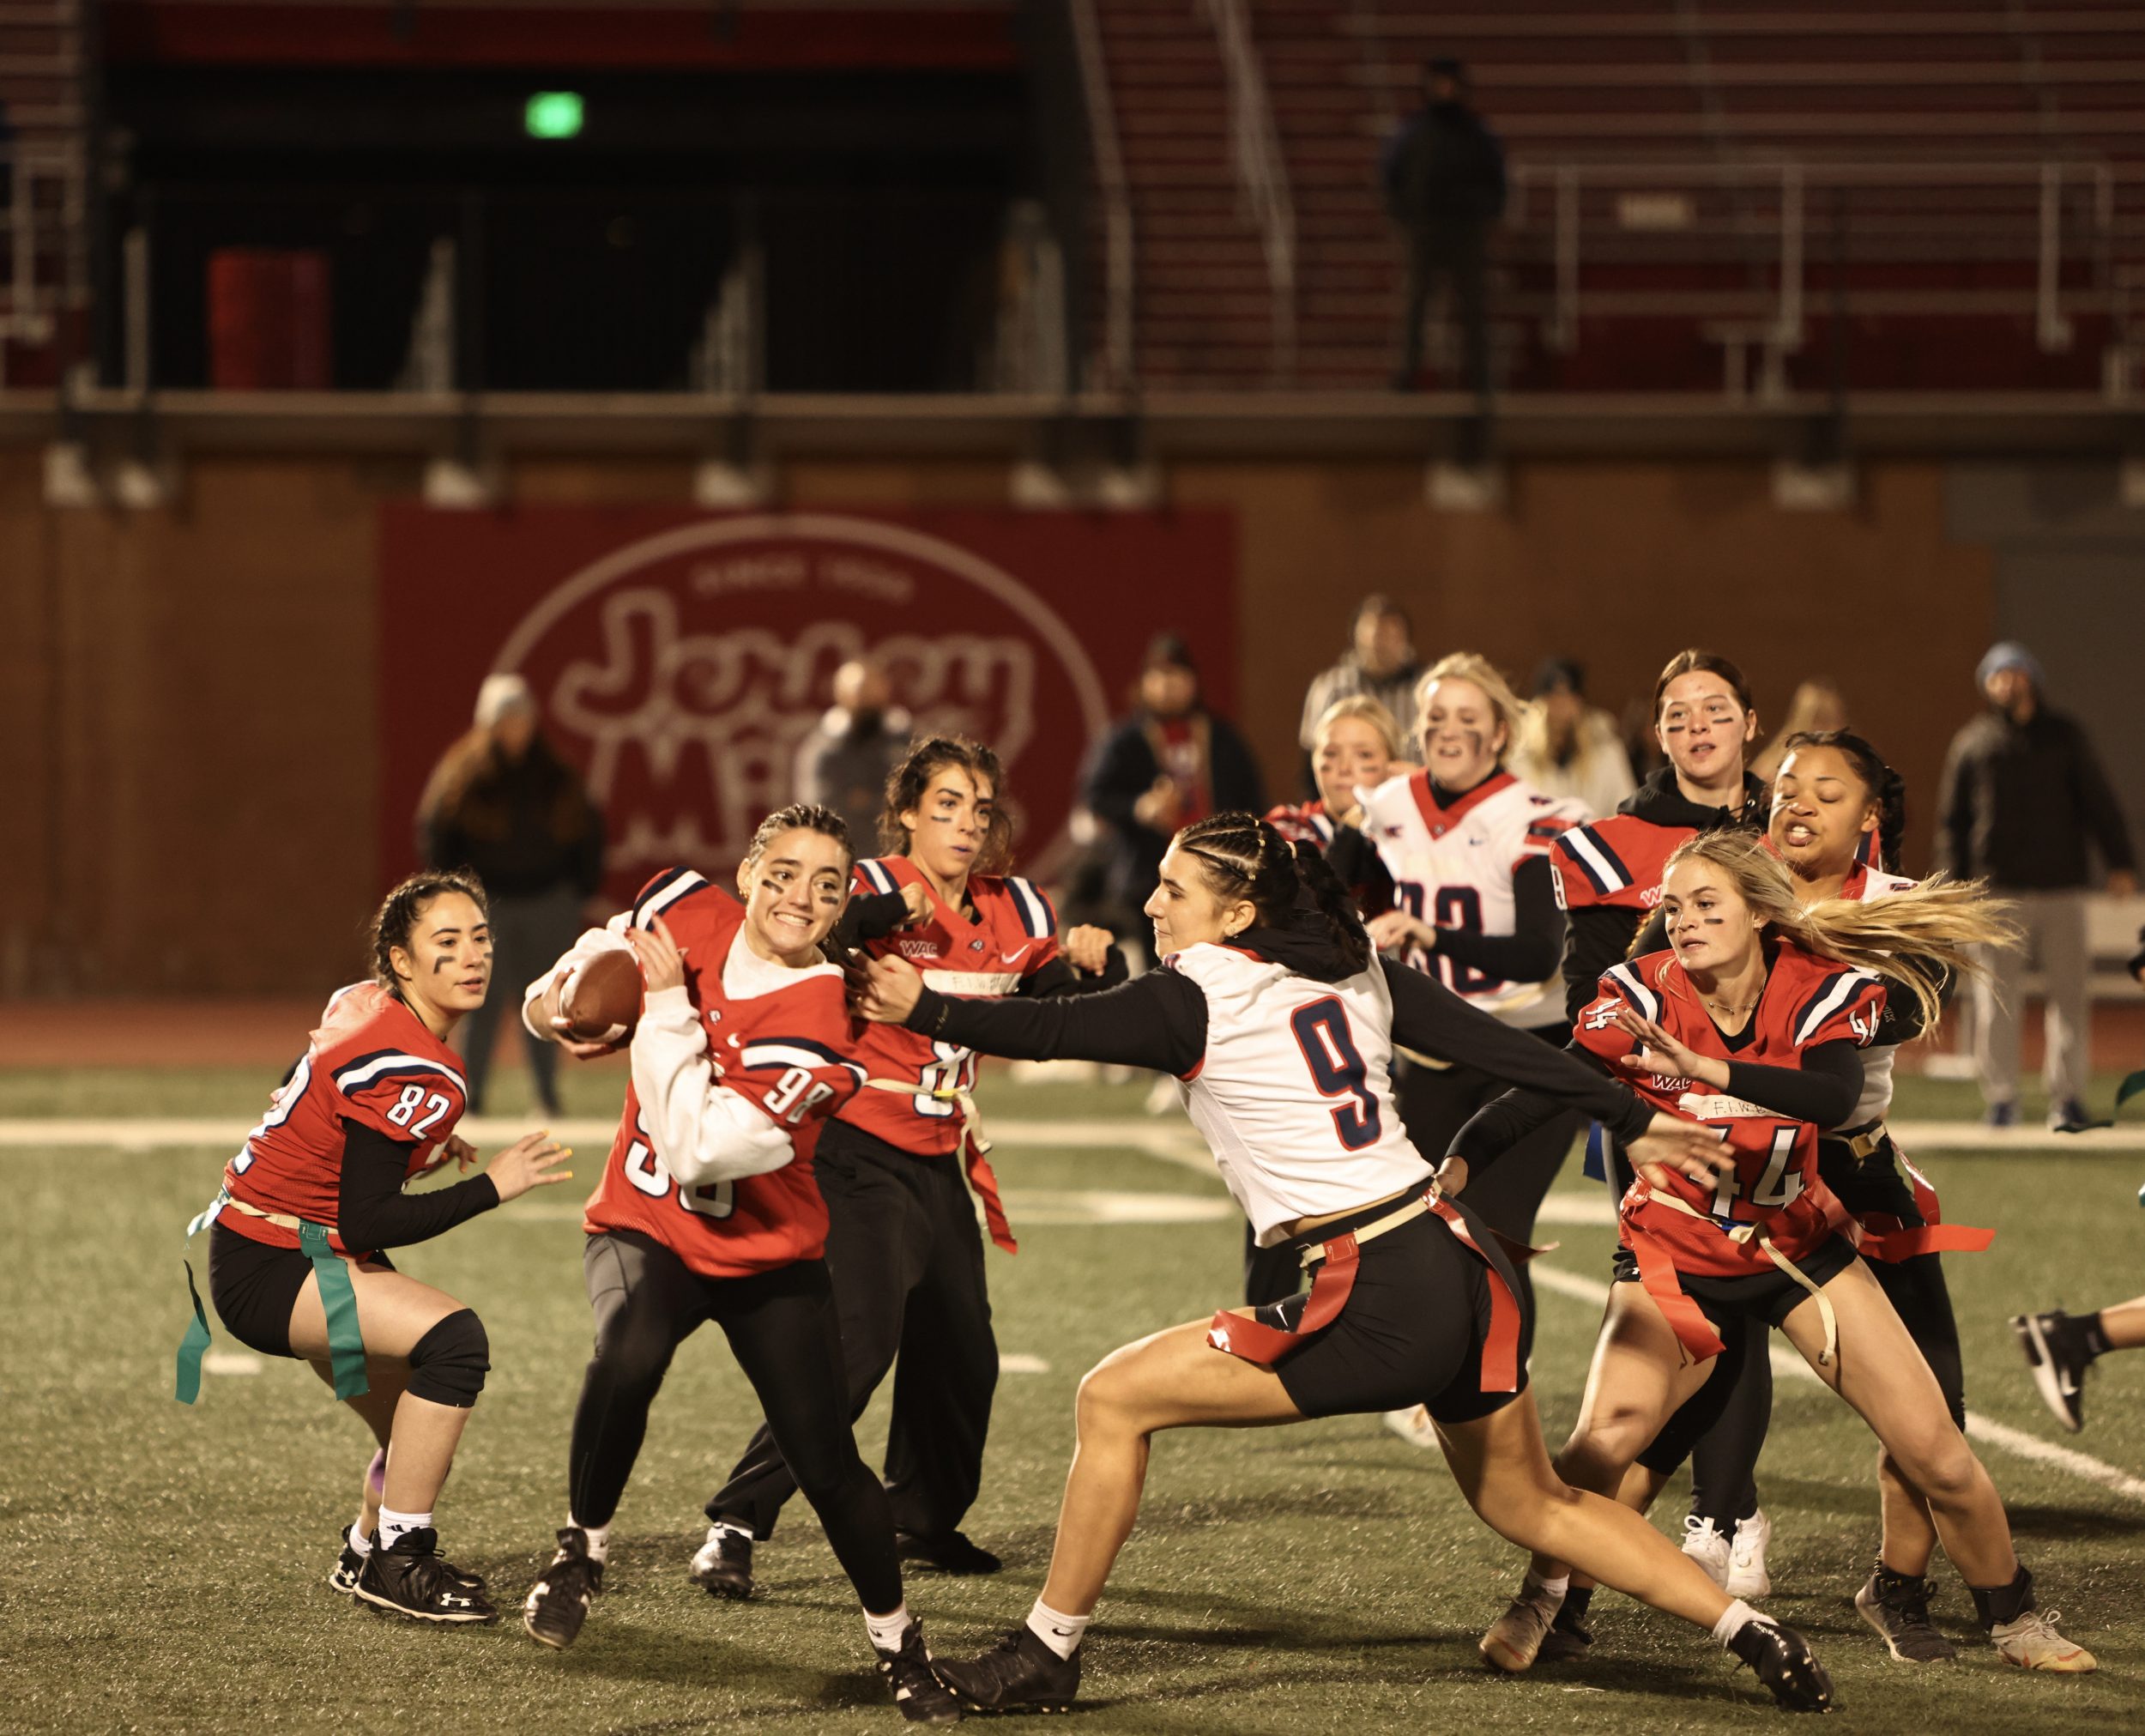 Powderpuff continues as a Utah Tech Homecoming tradition